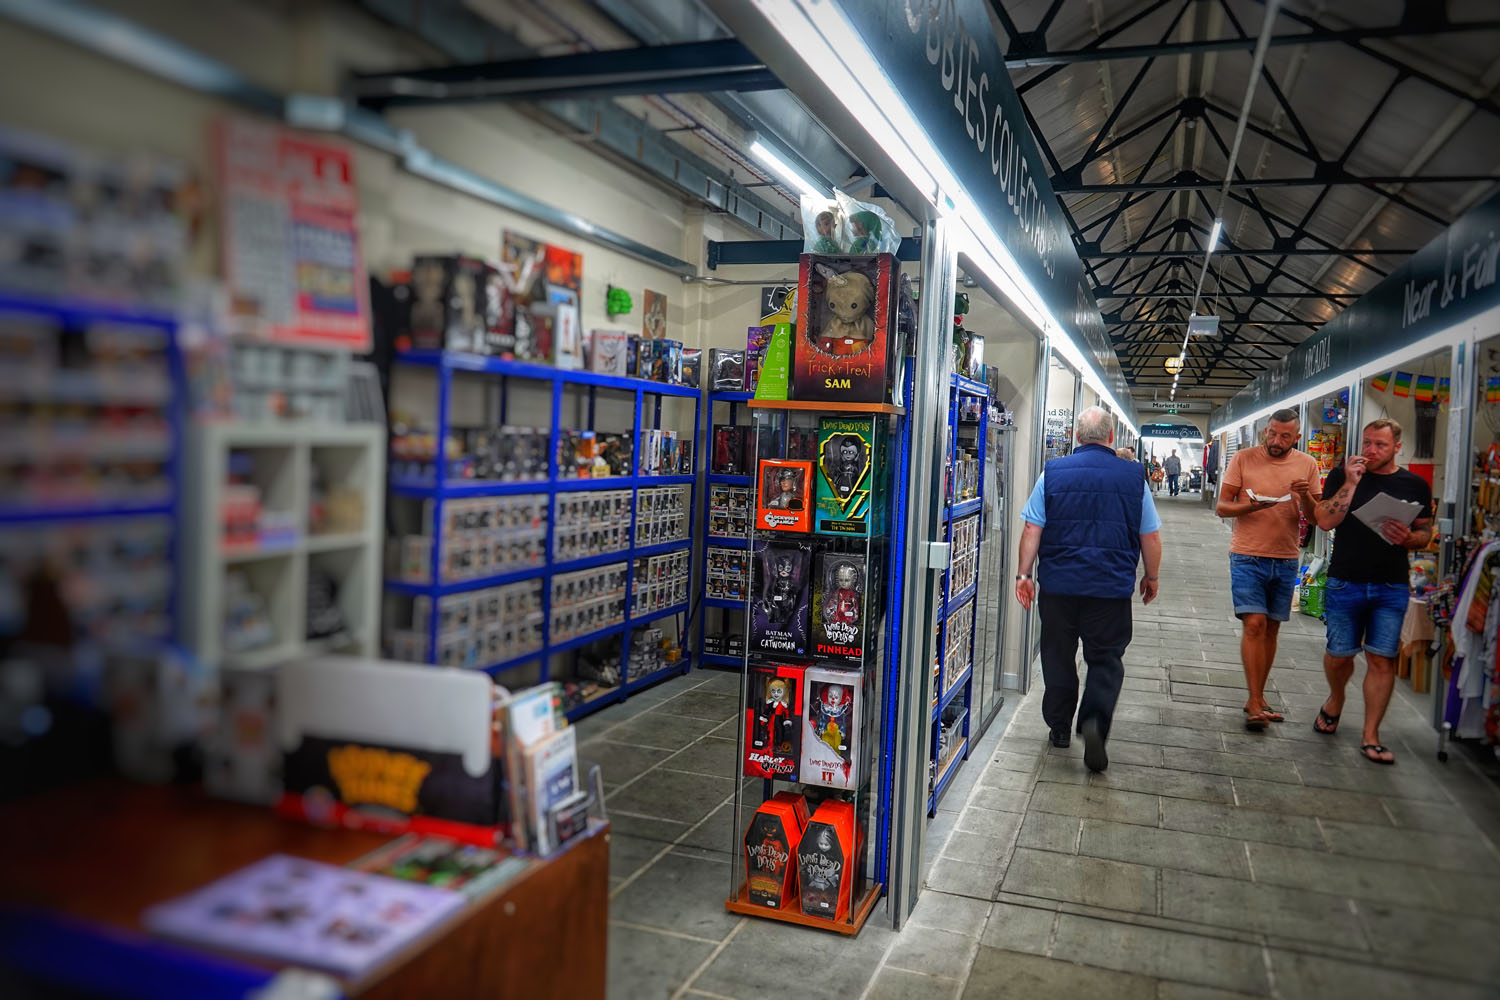 Trinity Market is not just about the food - it also features a range of great independent shopping outlets.